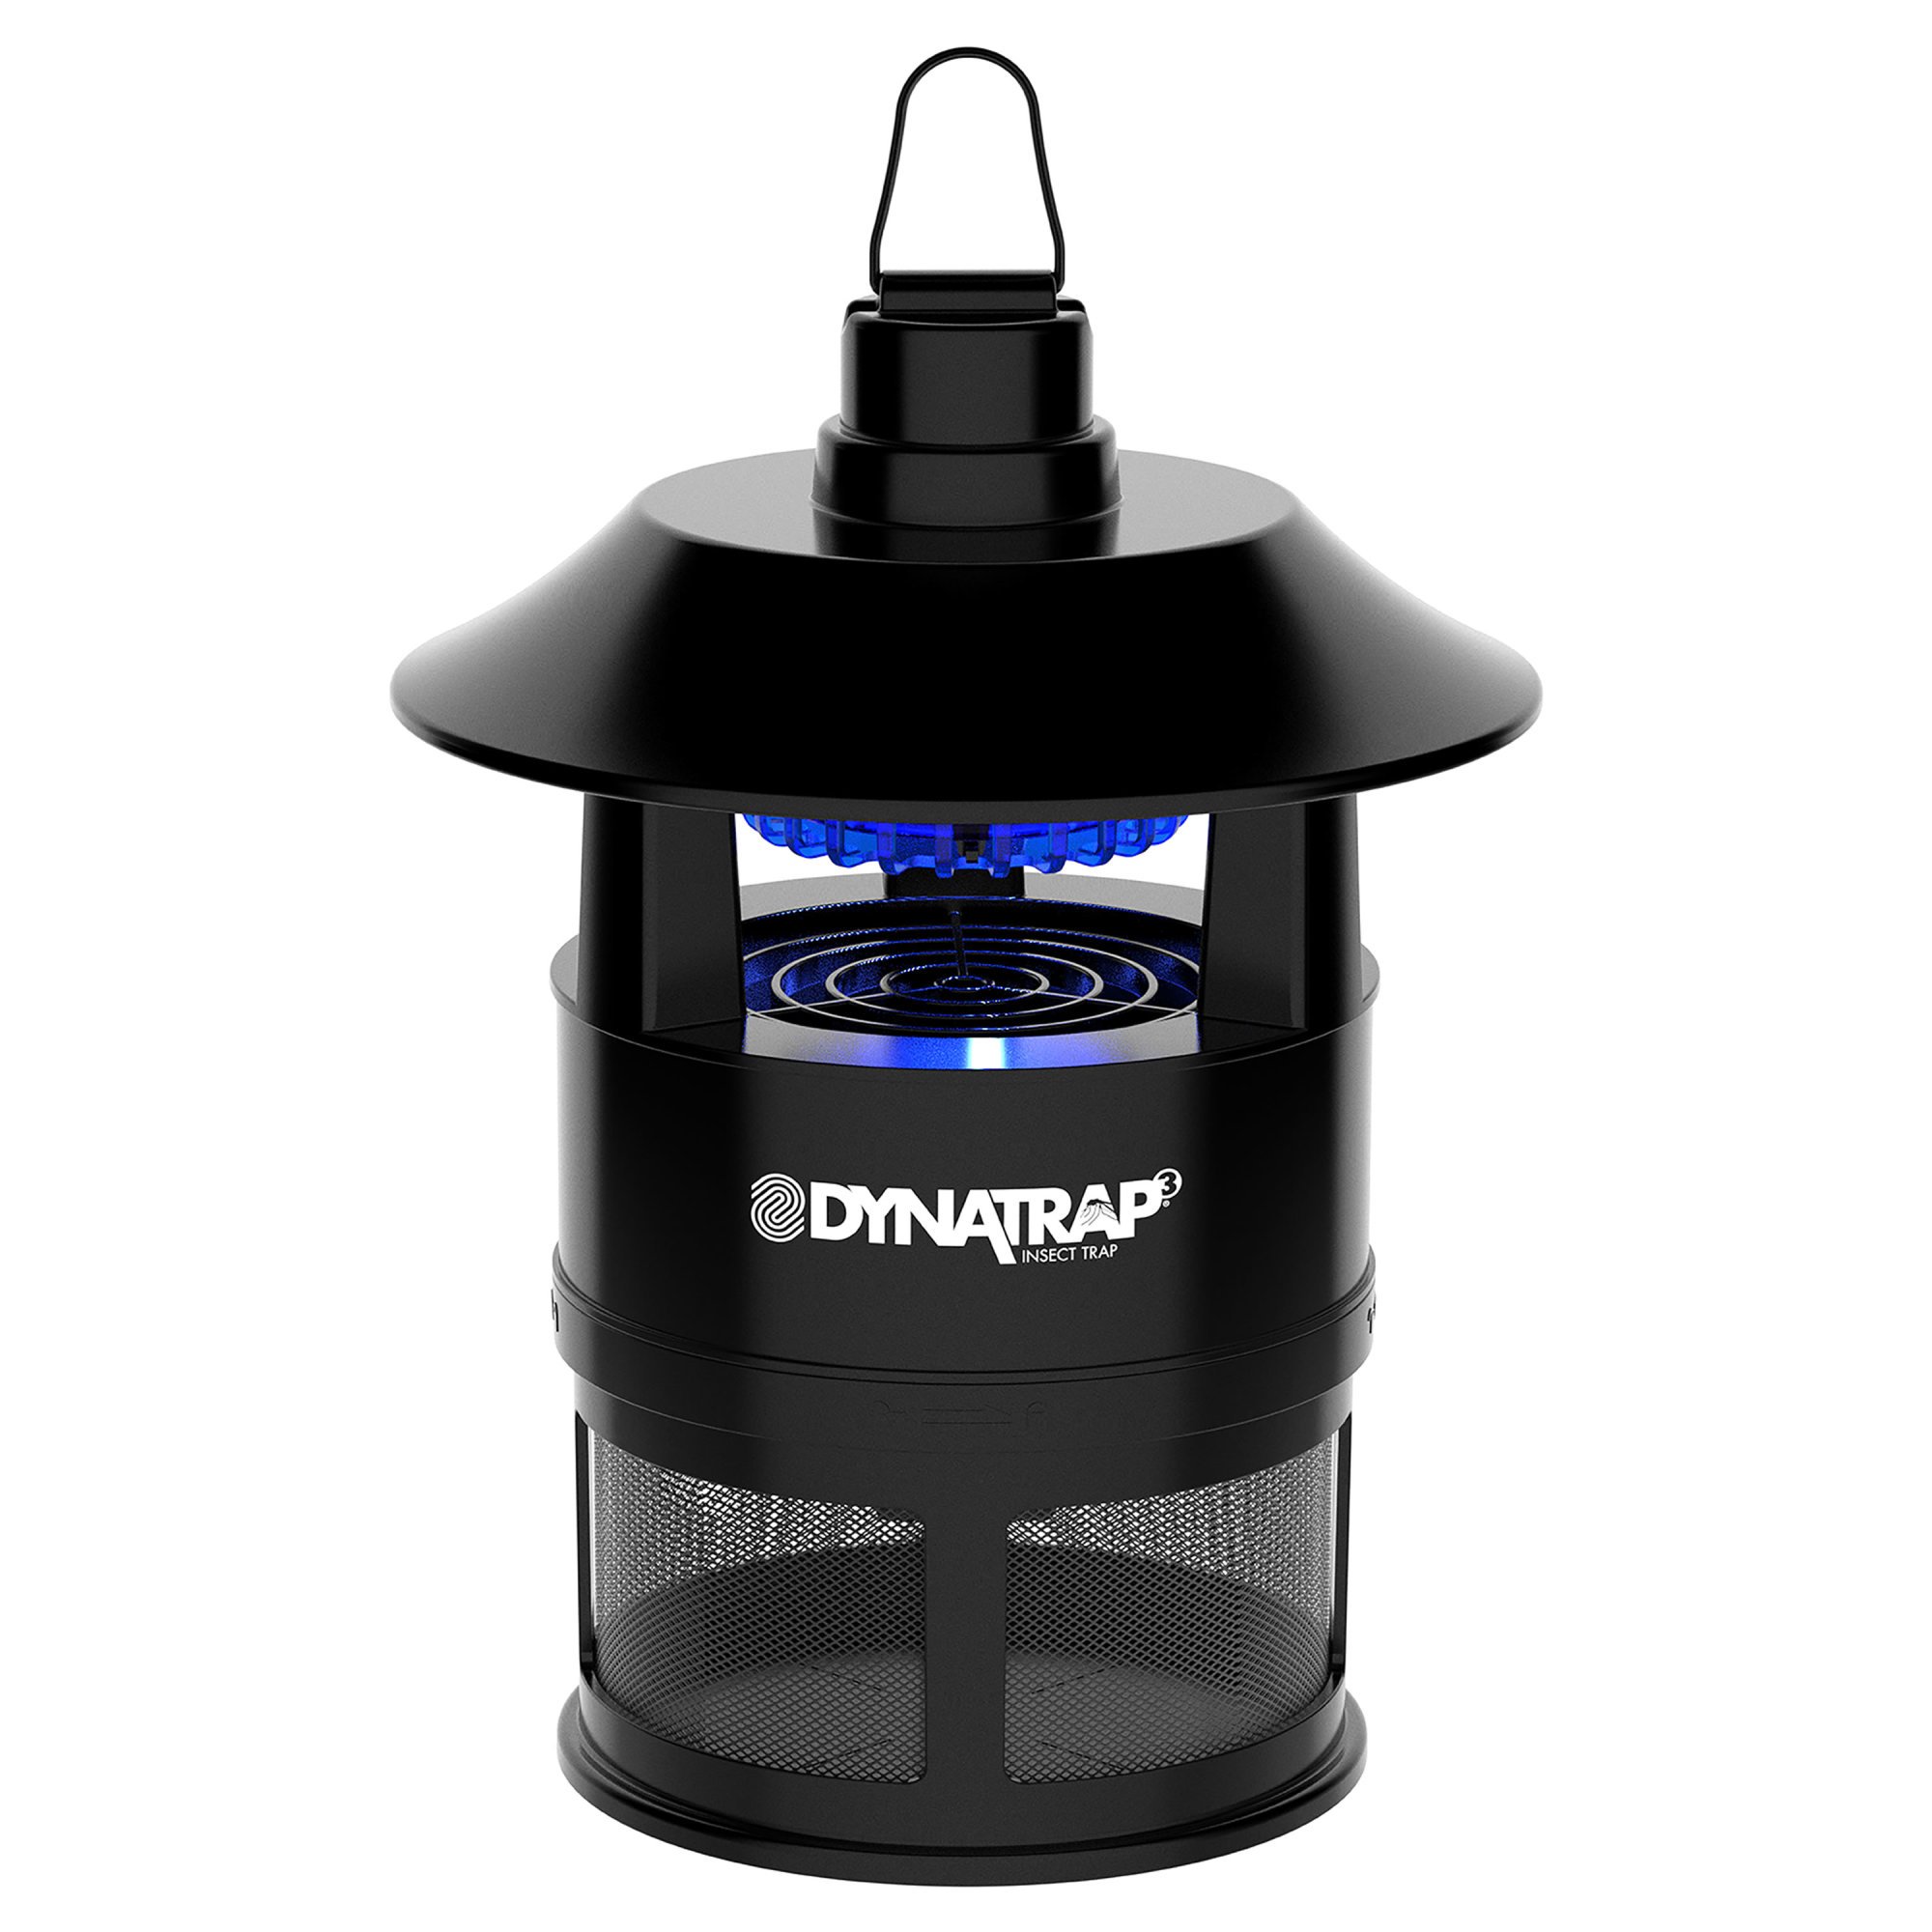 DynaTrap® Flying Insect Control Traps: Who are we?